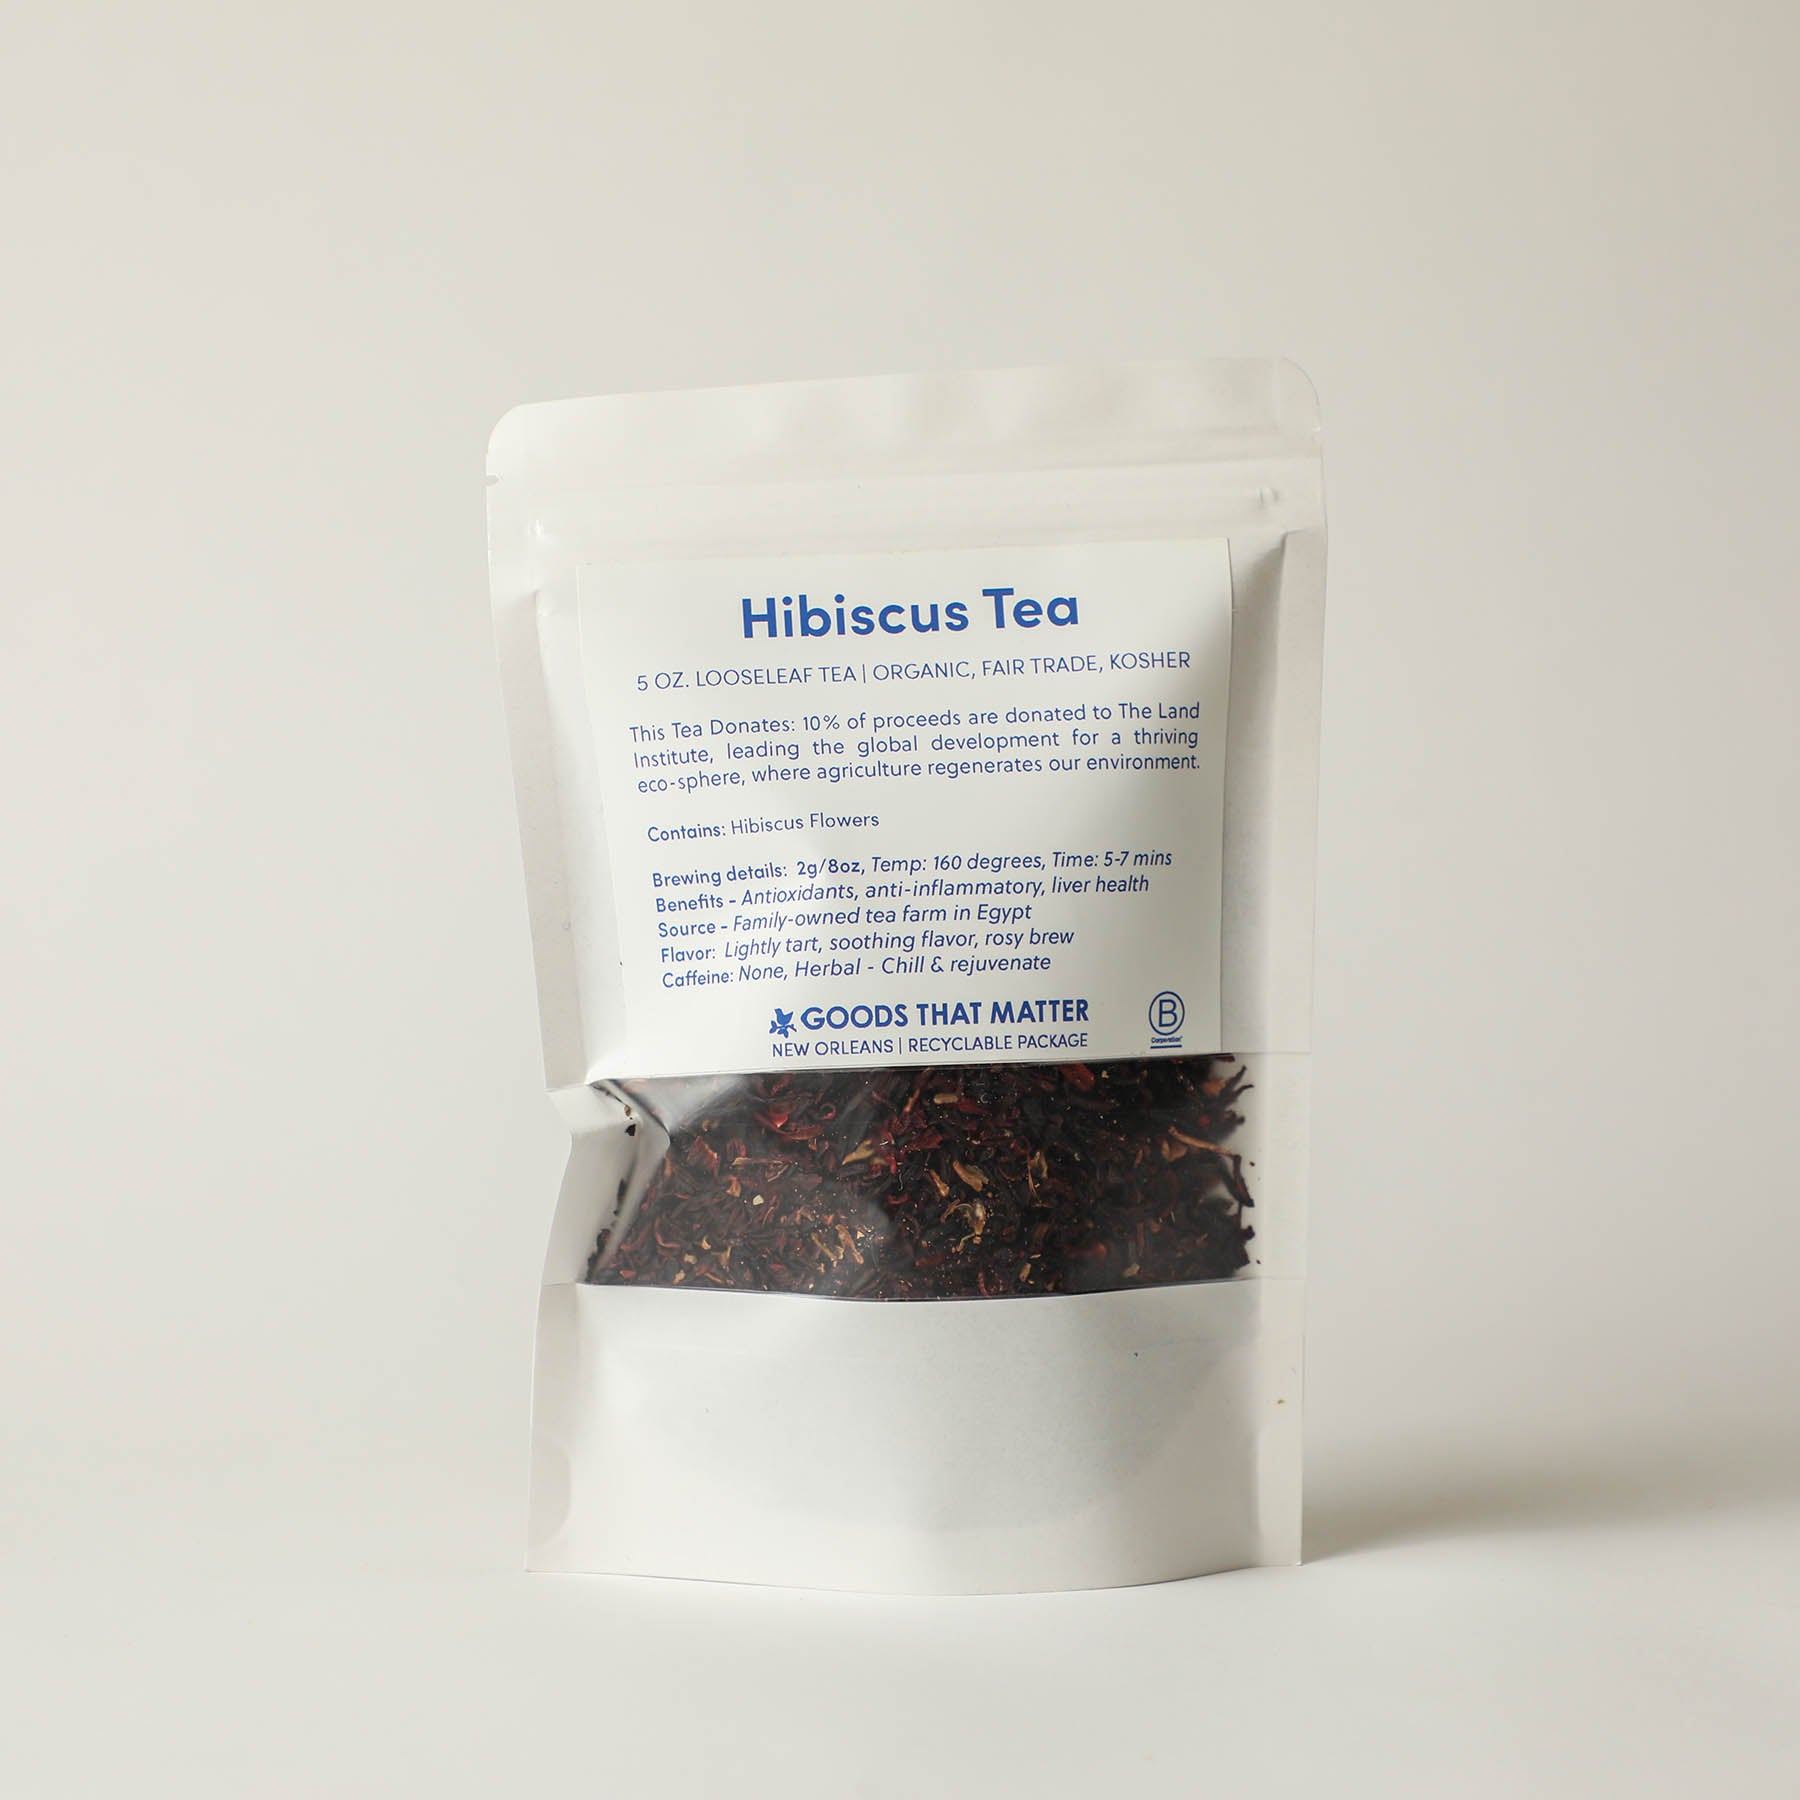 Hibiscus Looseleaf Benevolent Tea - Gives to the Land Institute